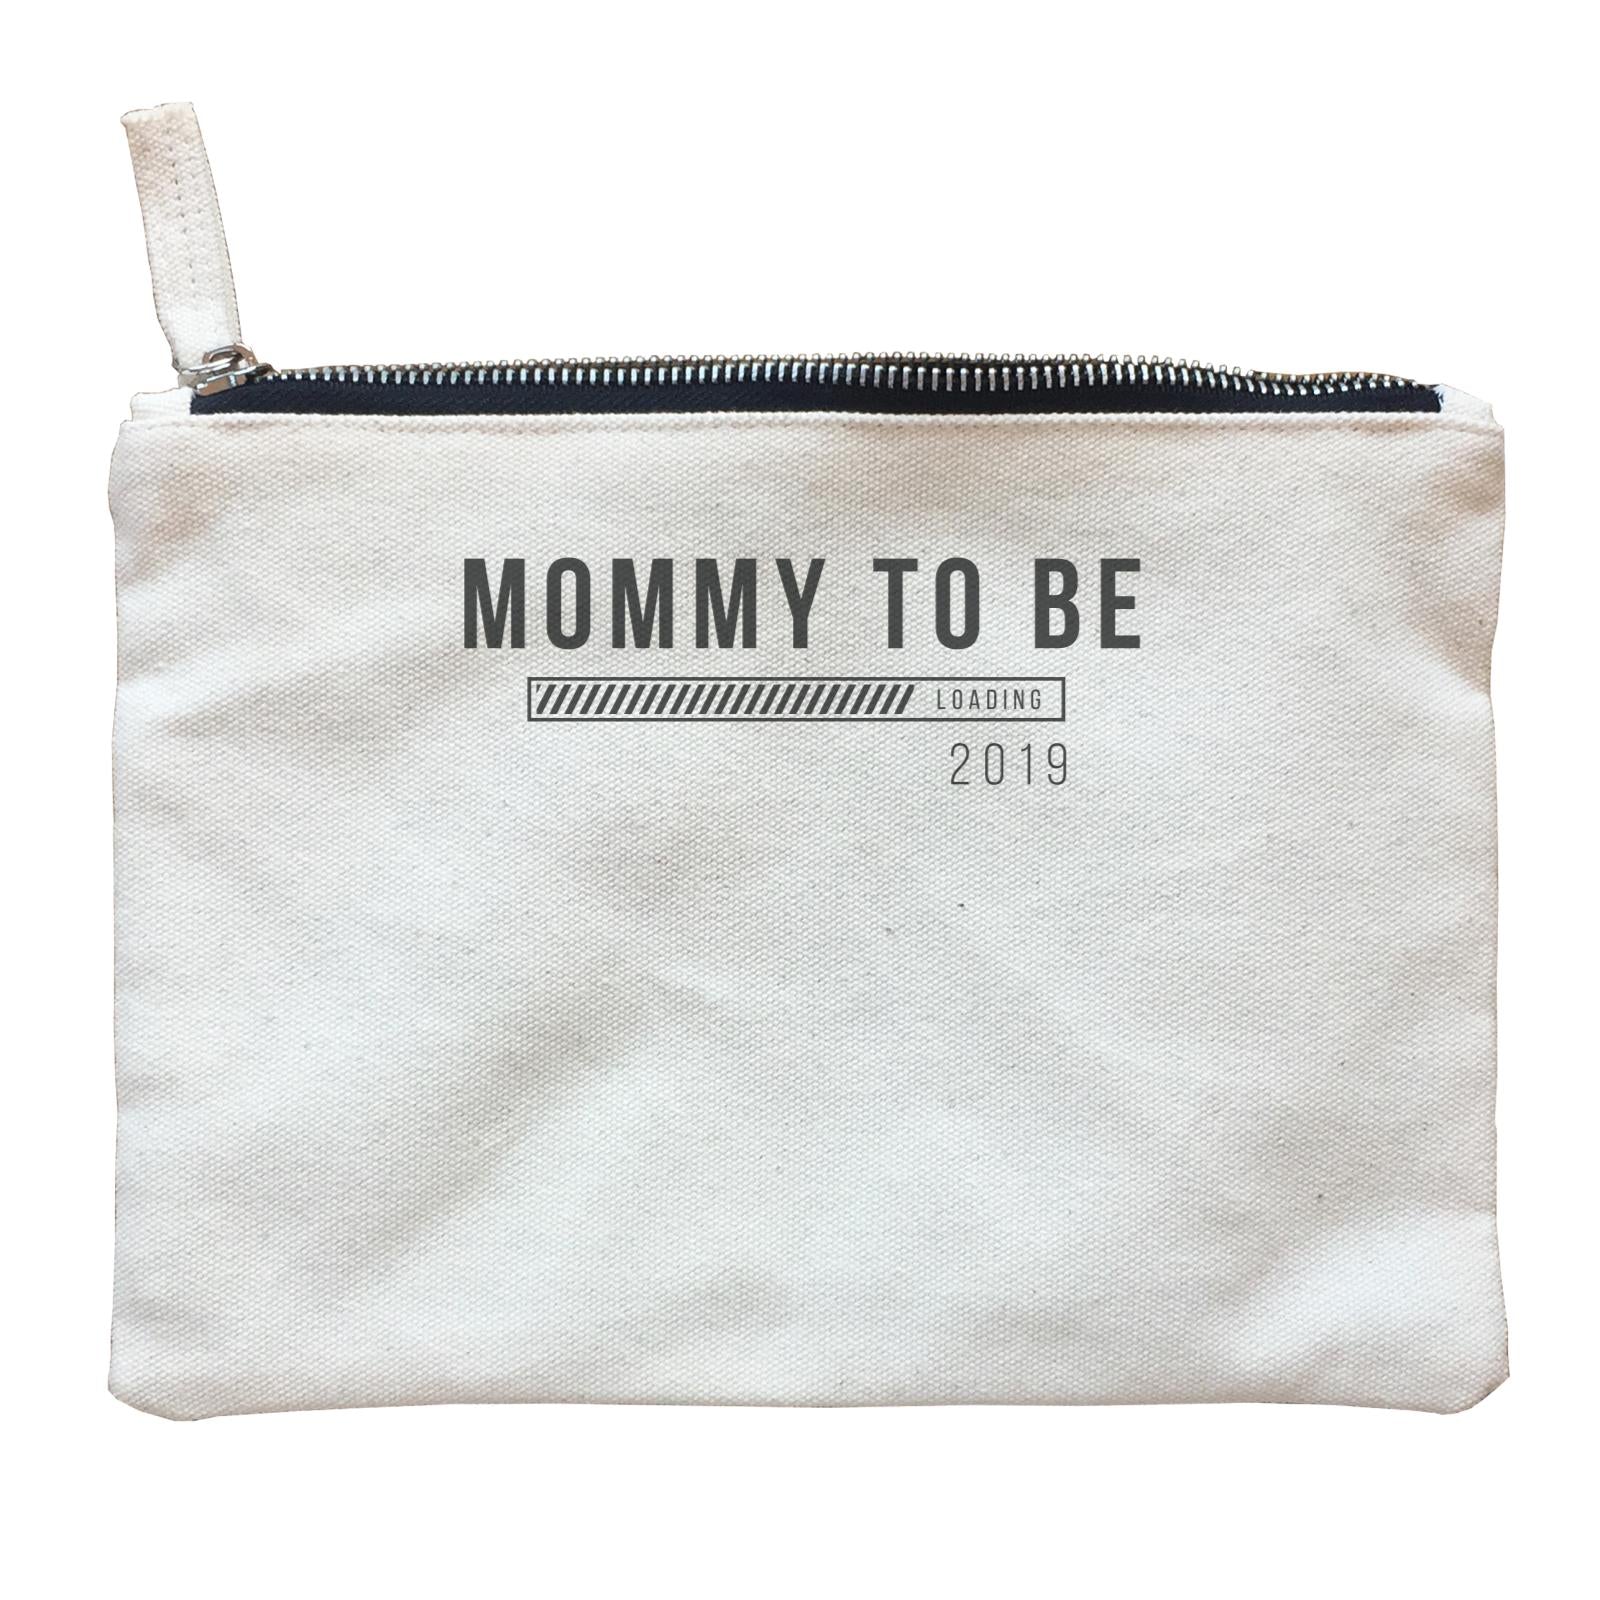 Coming Soon Family Mommy To Be Loading Add Date Zipper Pouch